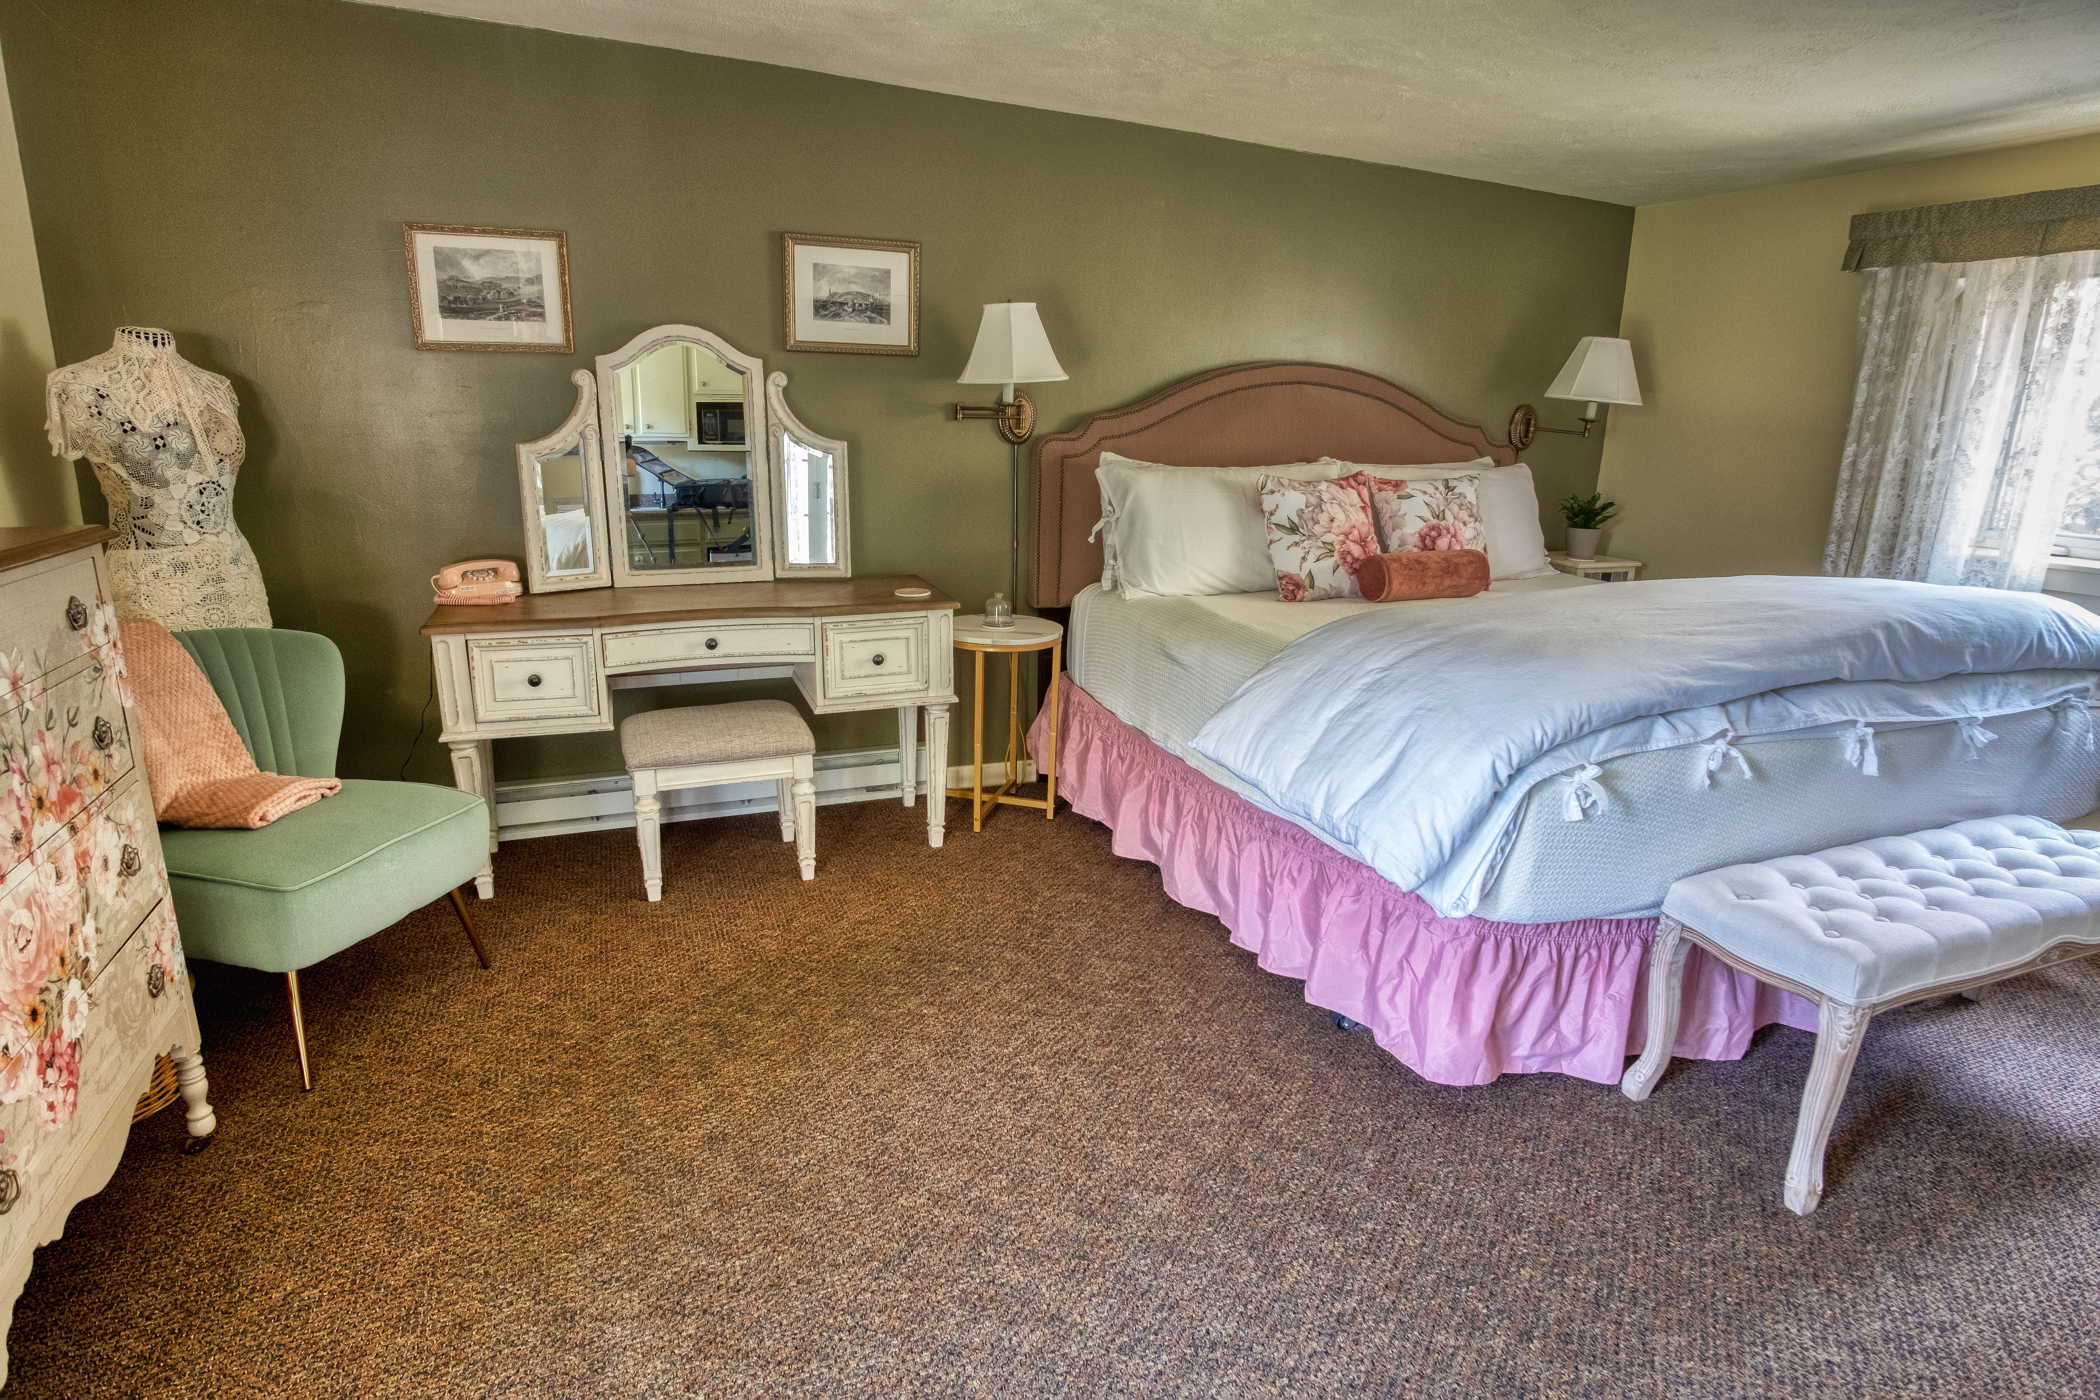  The Cottage at Country Willows Inn & Estate in Ashland, Oregon has a king size bed and a living area with delightful décor, soothing color combinations, live plants, and comfortable seating. 